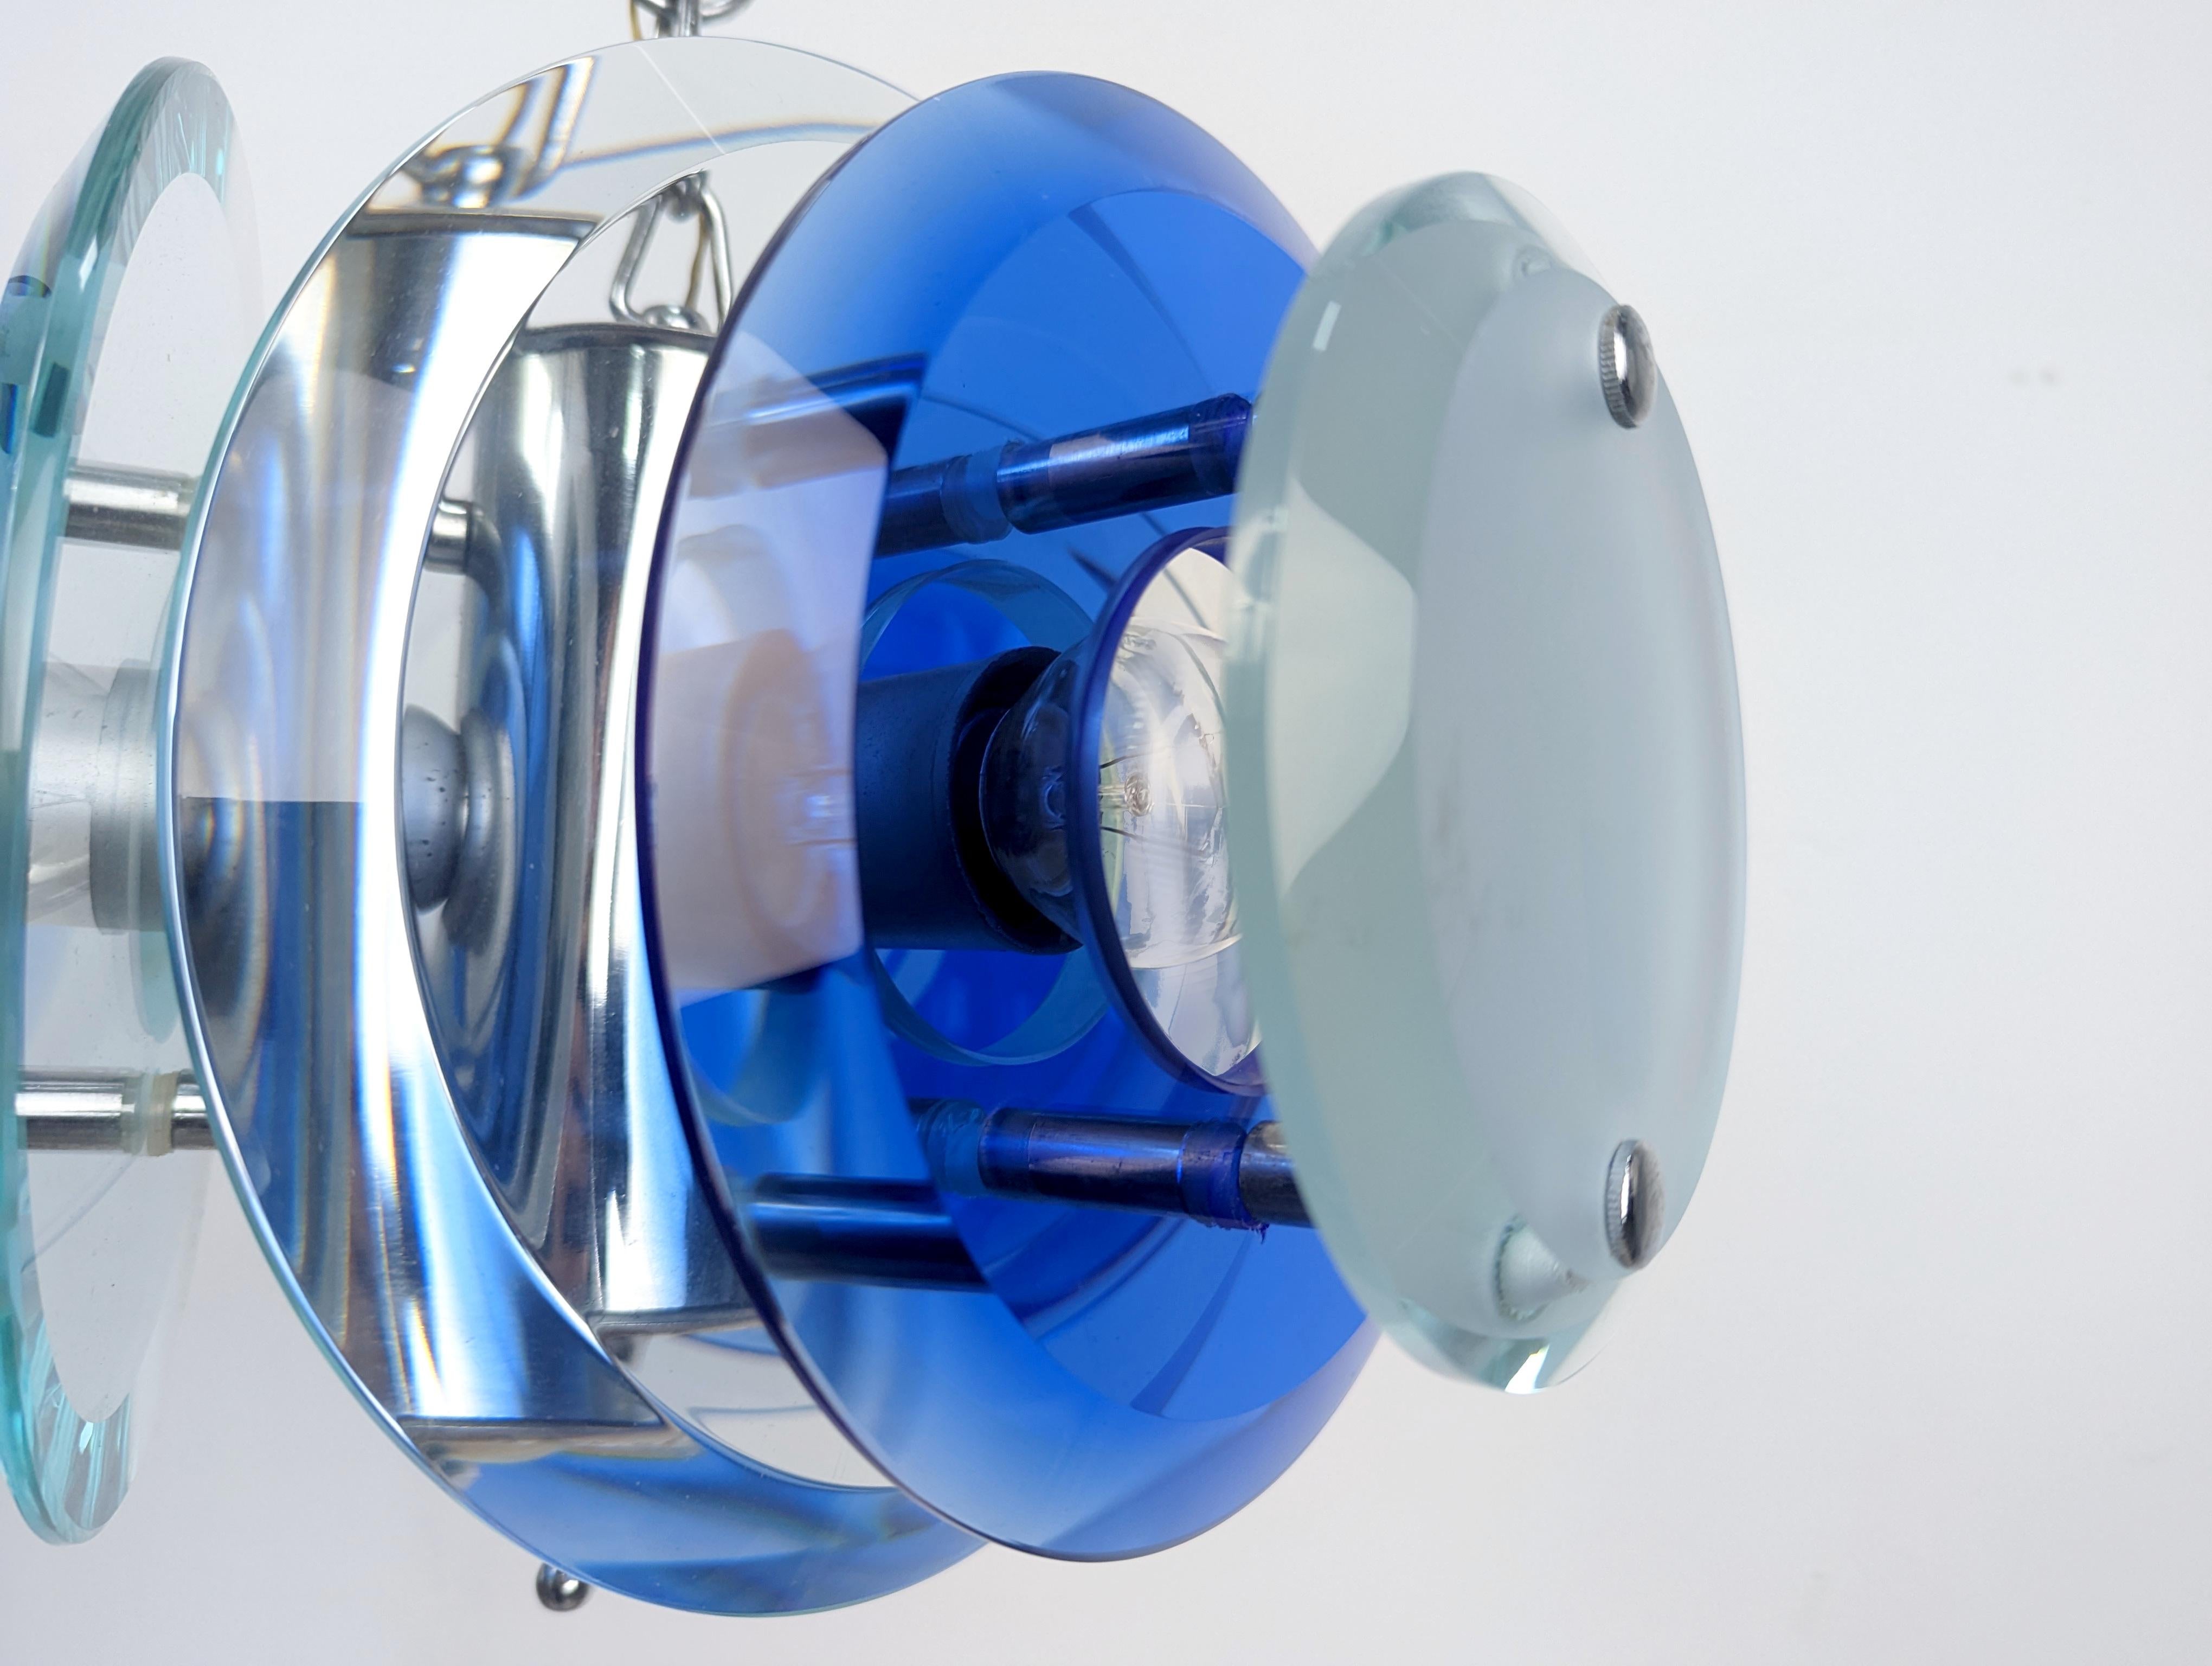 Precious lamp with thick blue and light crystals produced by the important Italian firm Veca and which, according to the designs that Max Ingrand introduced for Fontana Arte, provides us with a beautiful lamp that plays with light and blue tones to